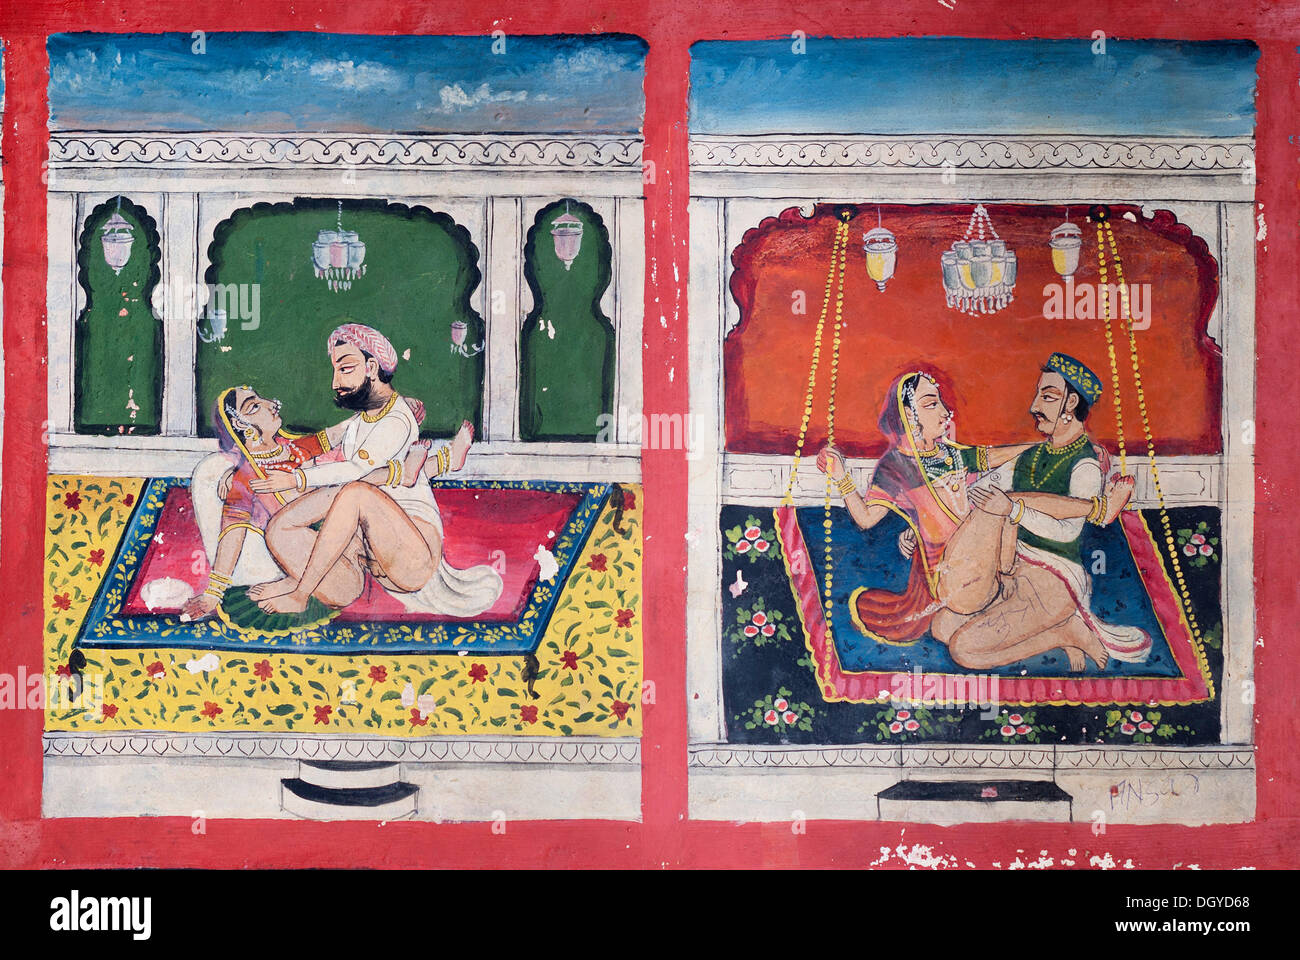 Scenes from the Kama Sutra, Juna Mahal, Old Palace, Dungarpur, Rajasthan, India, Asia Stock Photo